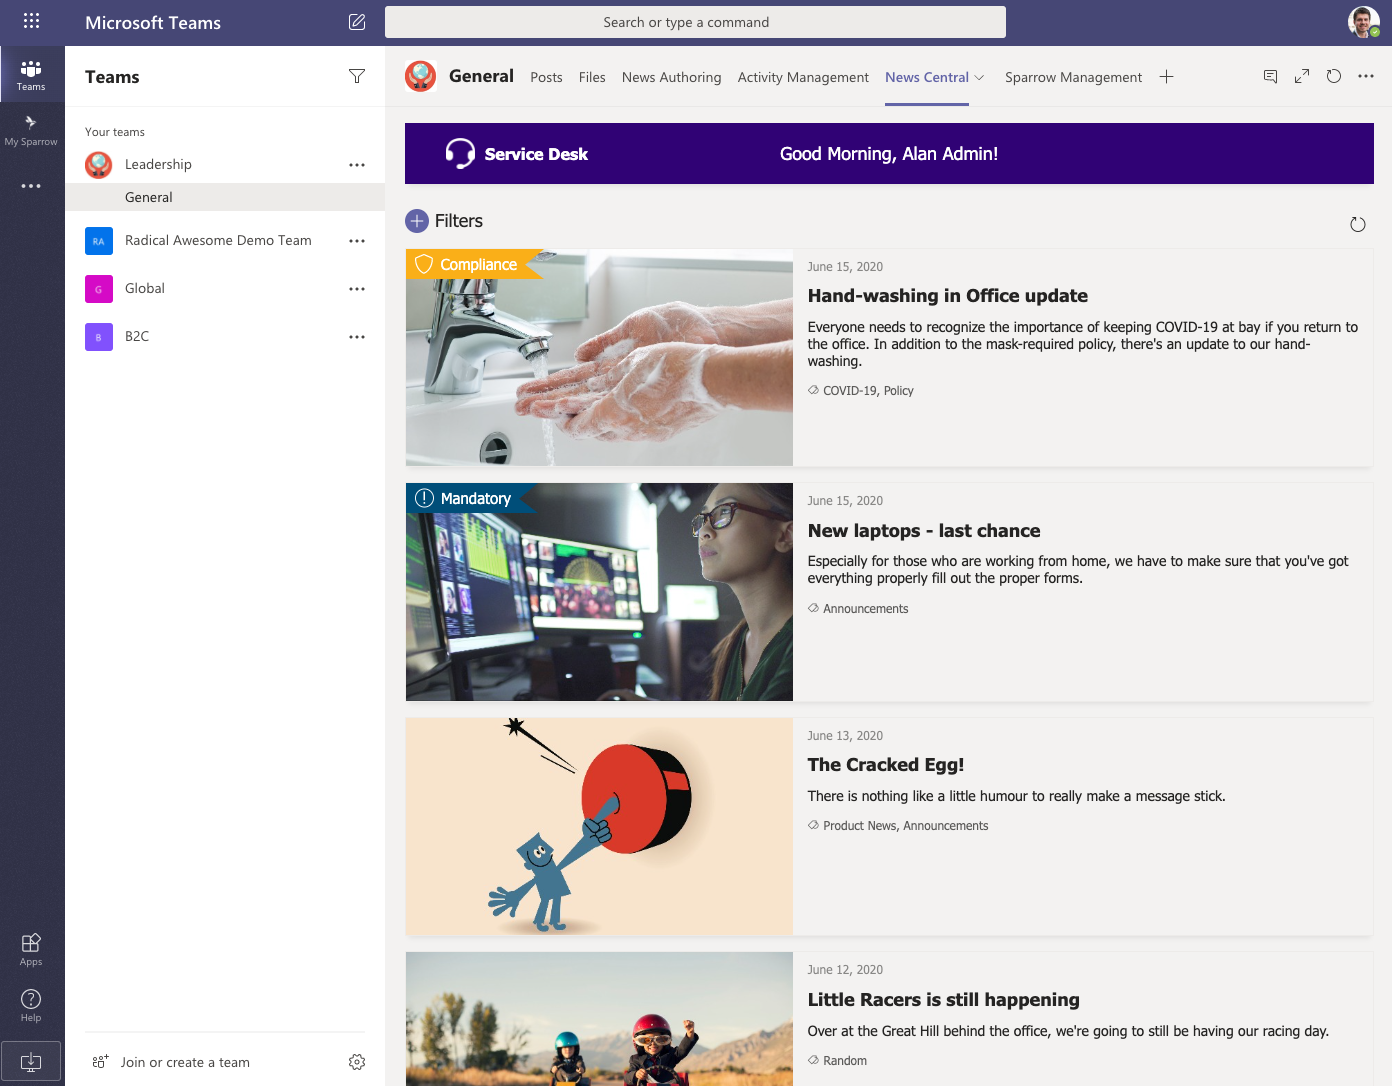 Microsoft Teams showing several stories with headlines and images.